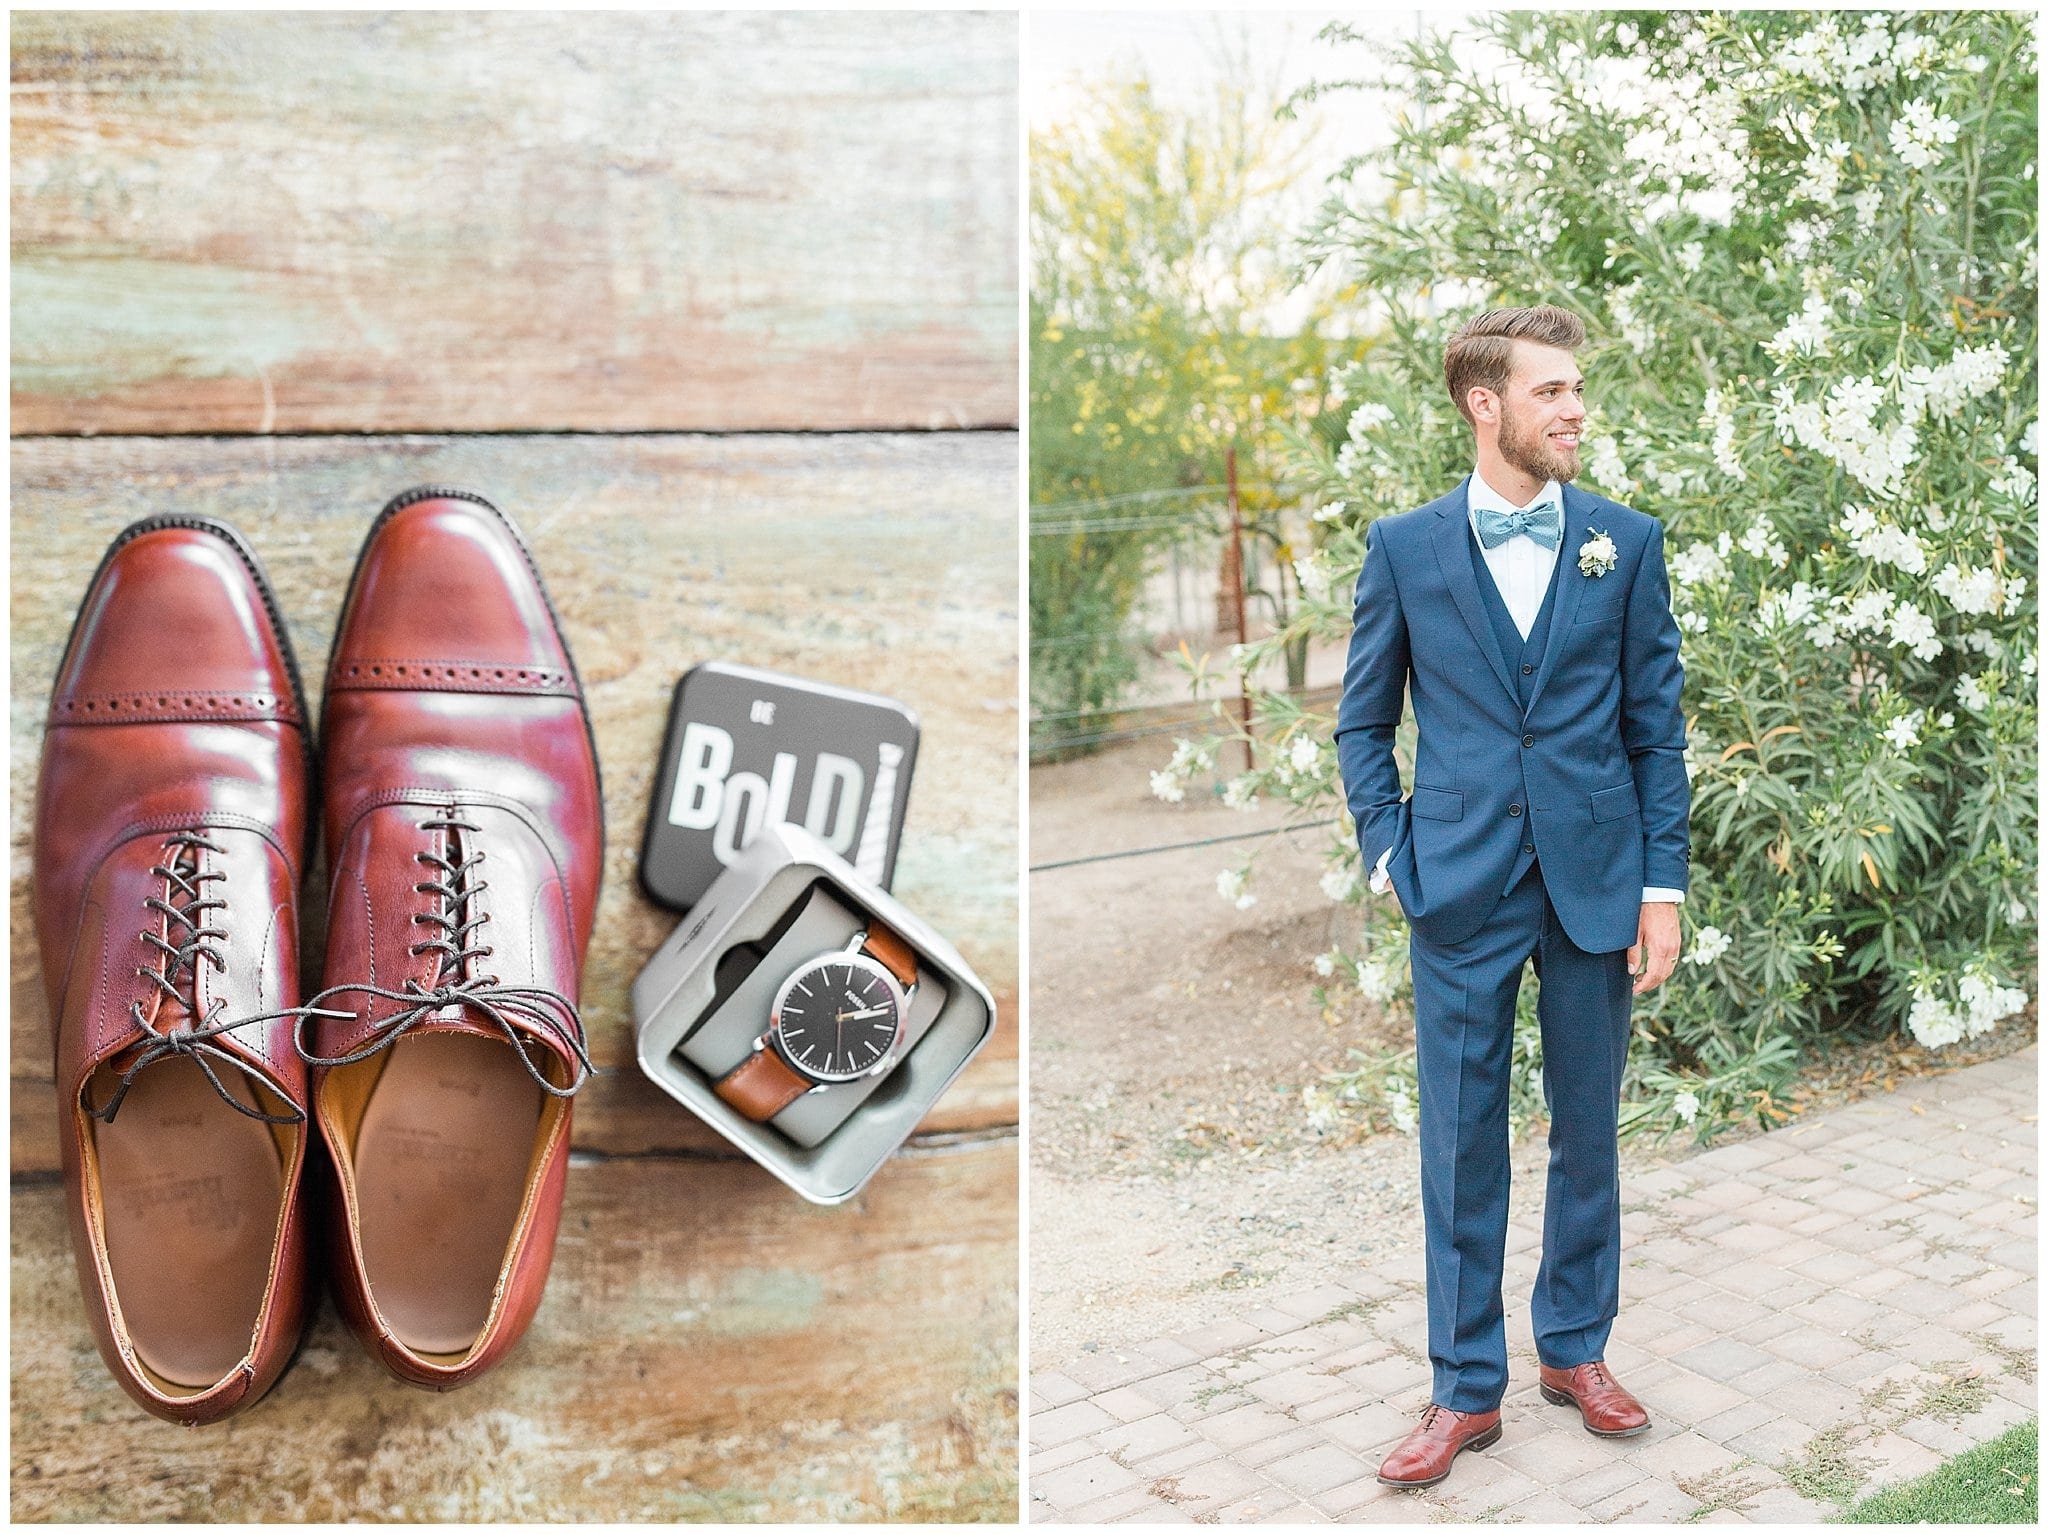 Windmill Winery Twisted Tree Ceremony Location | Groom Portrait and Groom Shoe and Watch details